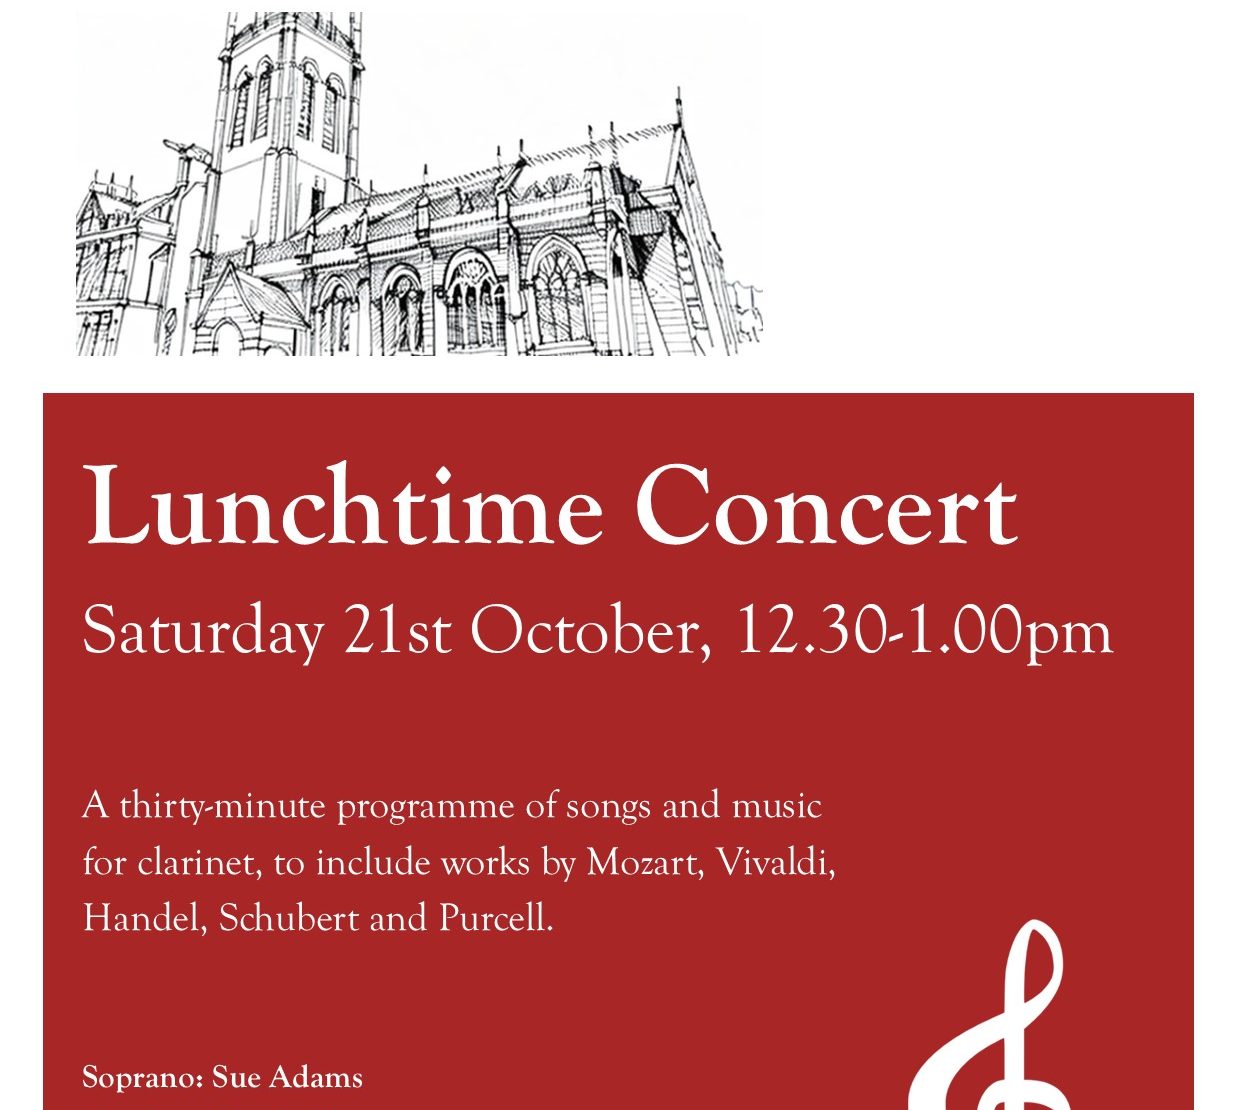 Lunchtime concert poster